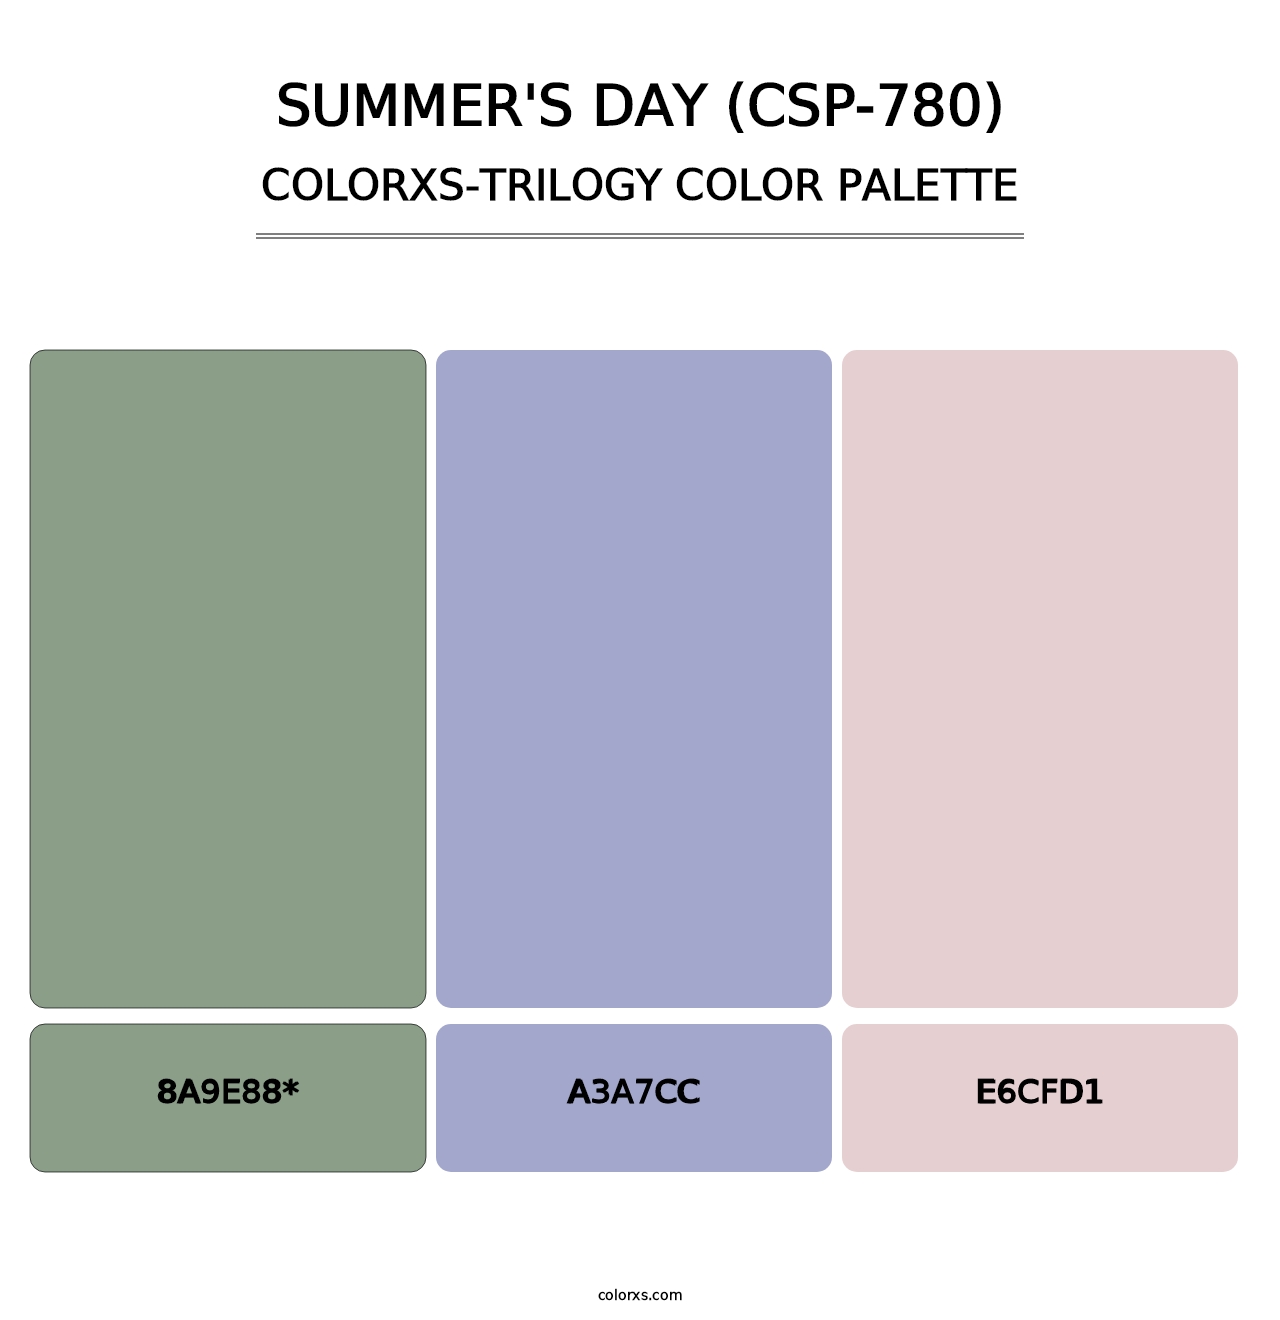 Summer's Day (CSP-780) - Colorxs Trilogy Palette